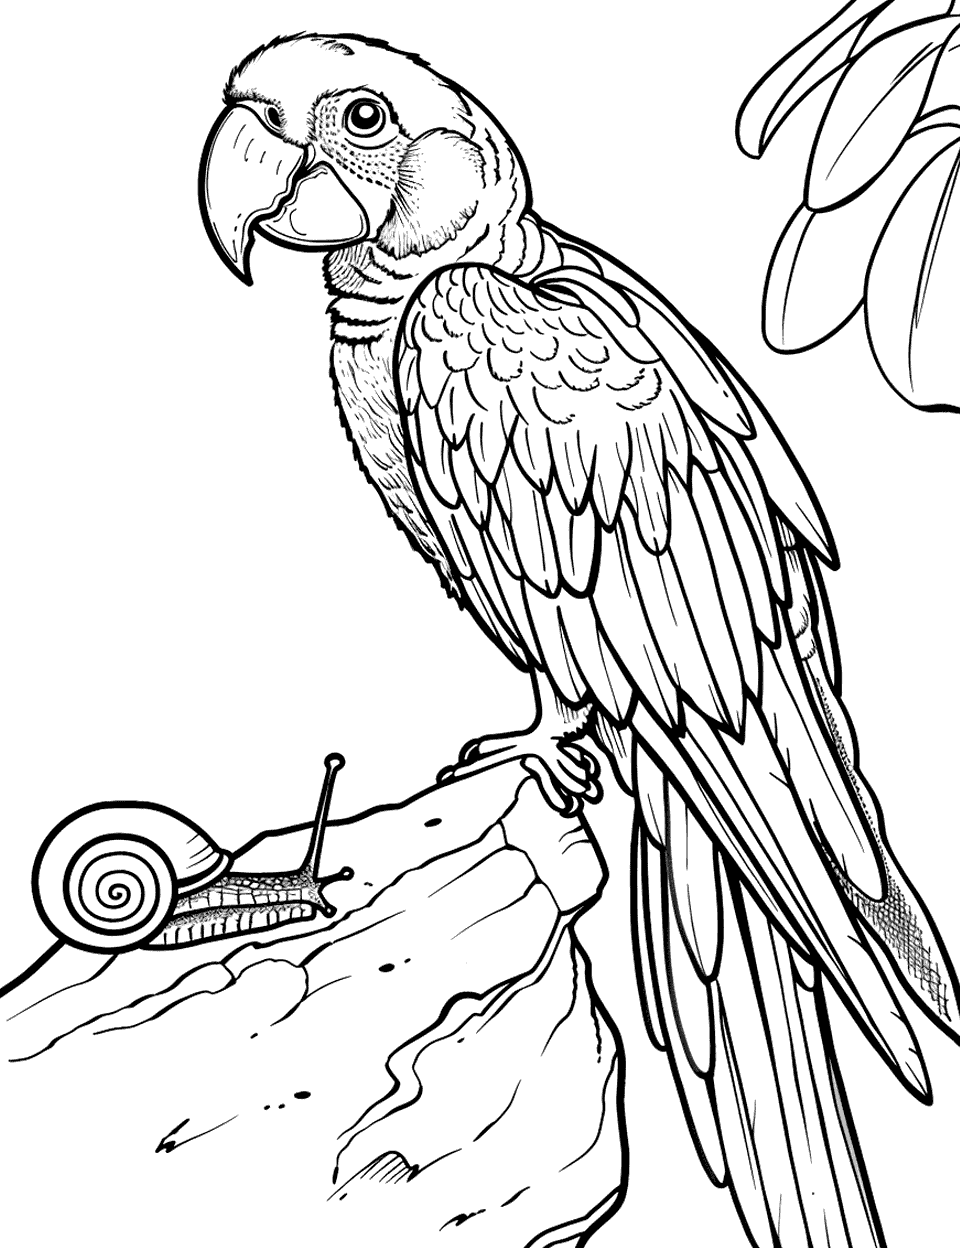 Macaw Observing a Snail Parrot Coloring Page - A macaw curiously watching a small snail crawl.